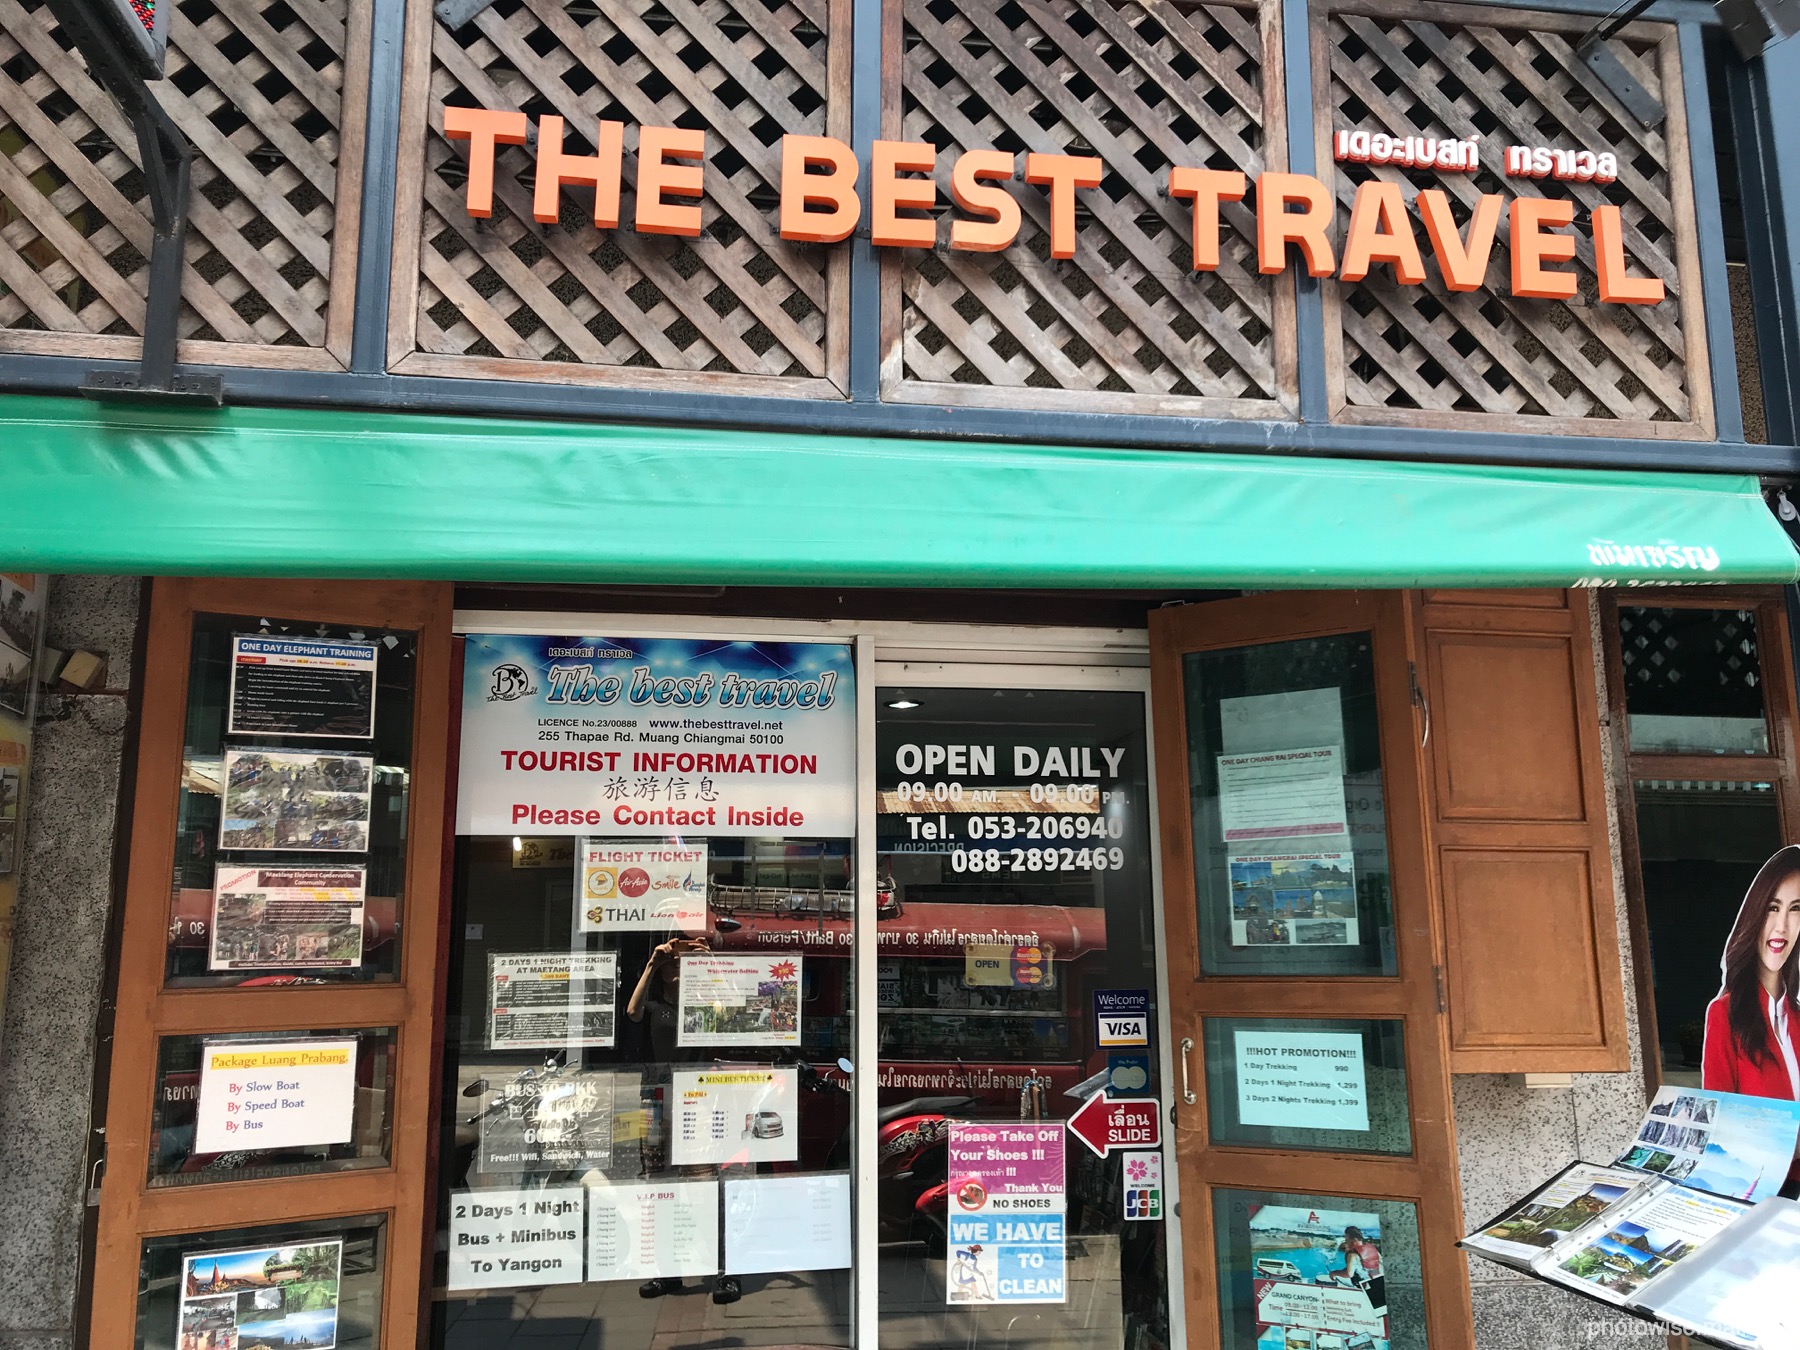 The Best Travel